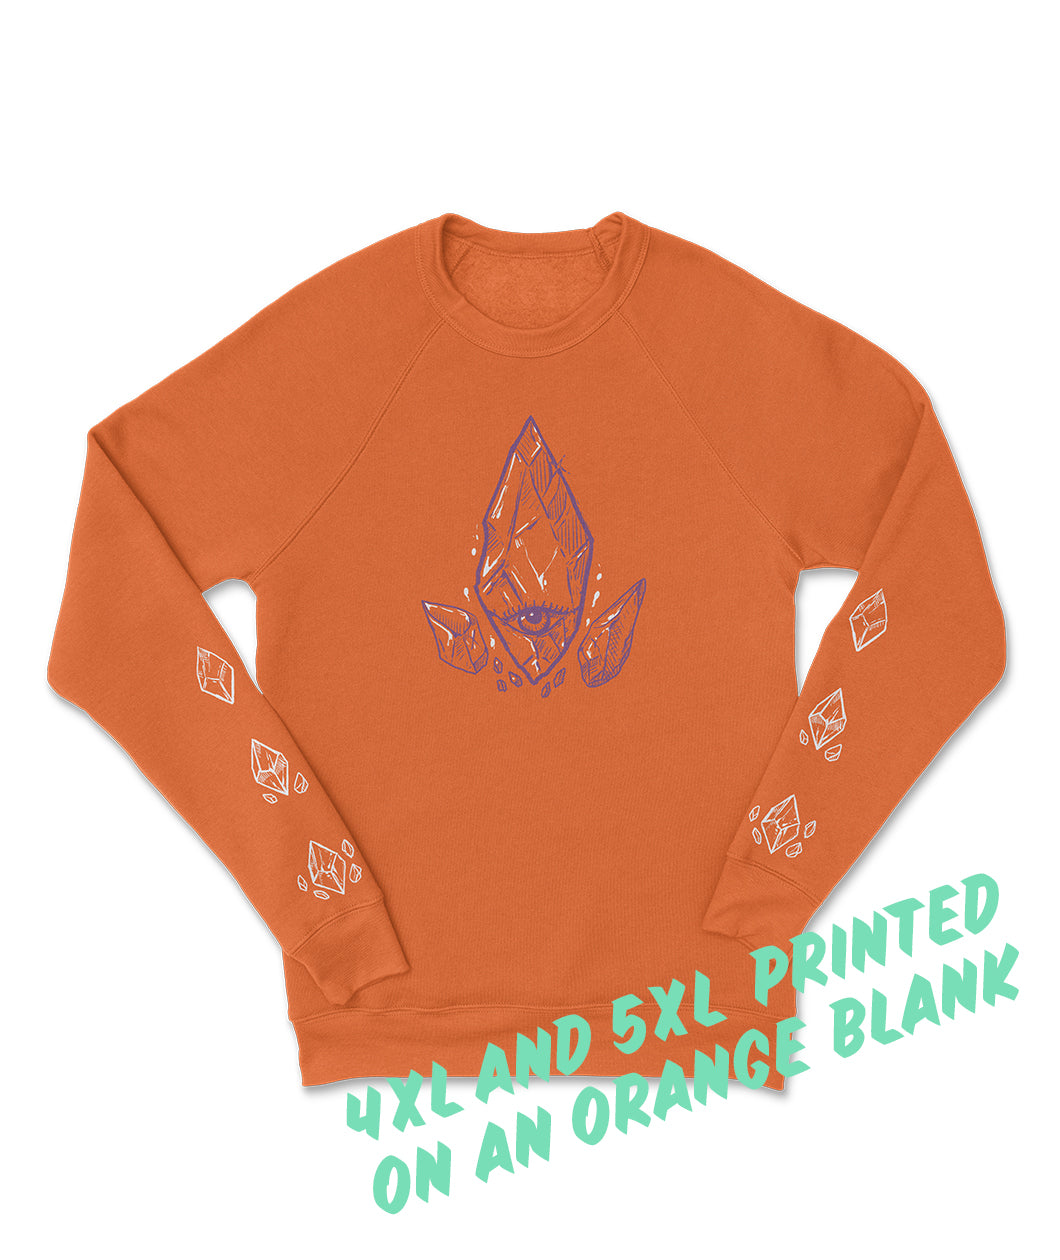 The Invisible Beetle shirt from Tyler Thrasher in a dark orange with the text "4xl and 5xl printed on an orange blank". 